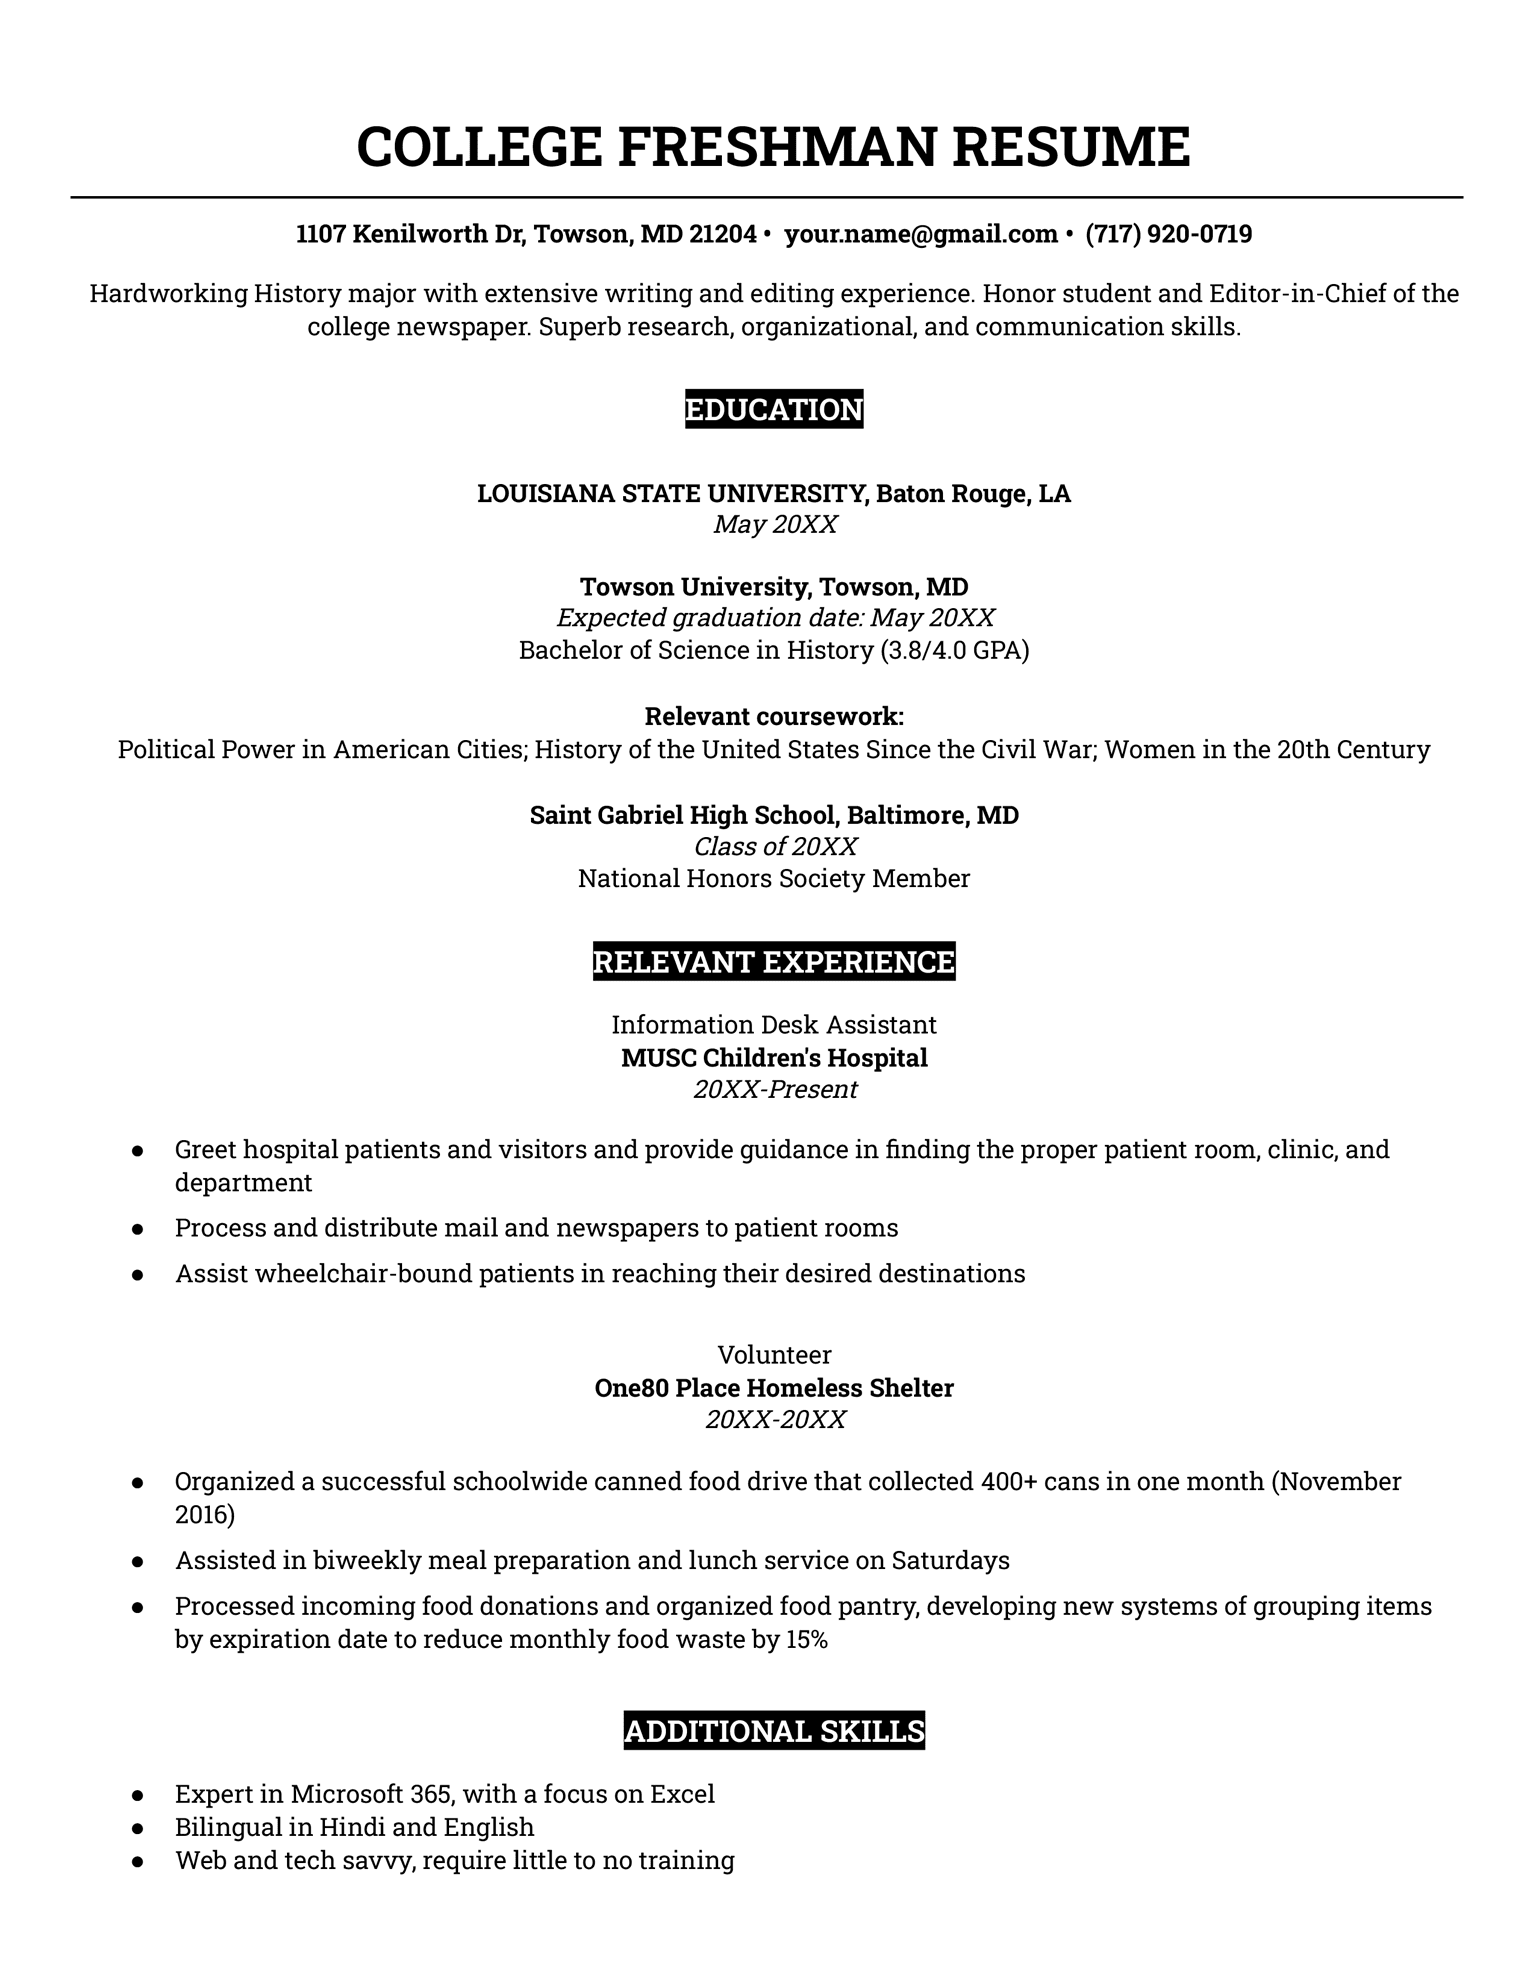 An example of a college freshman resume using a simple, traditional resume layout.